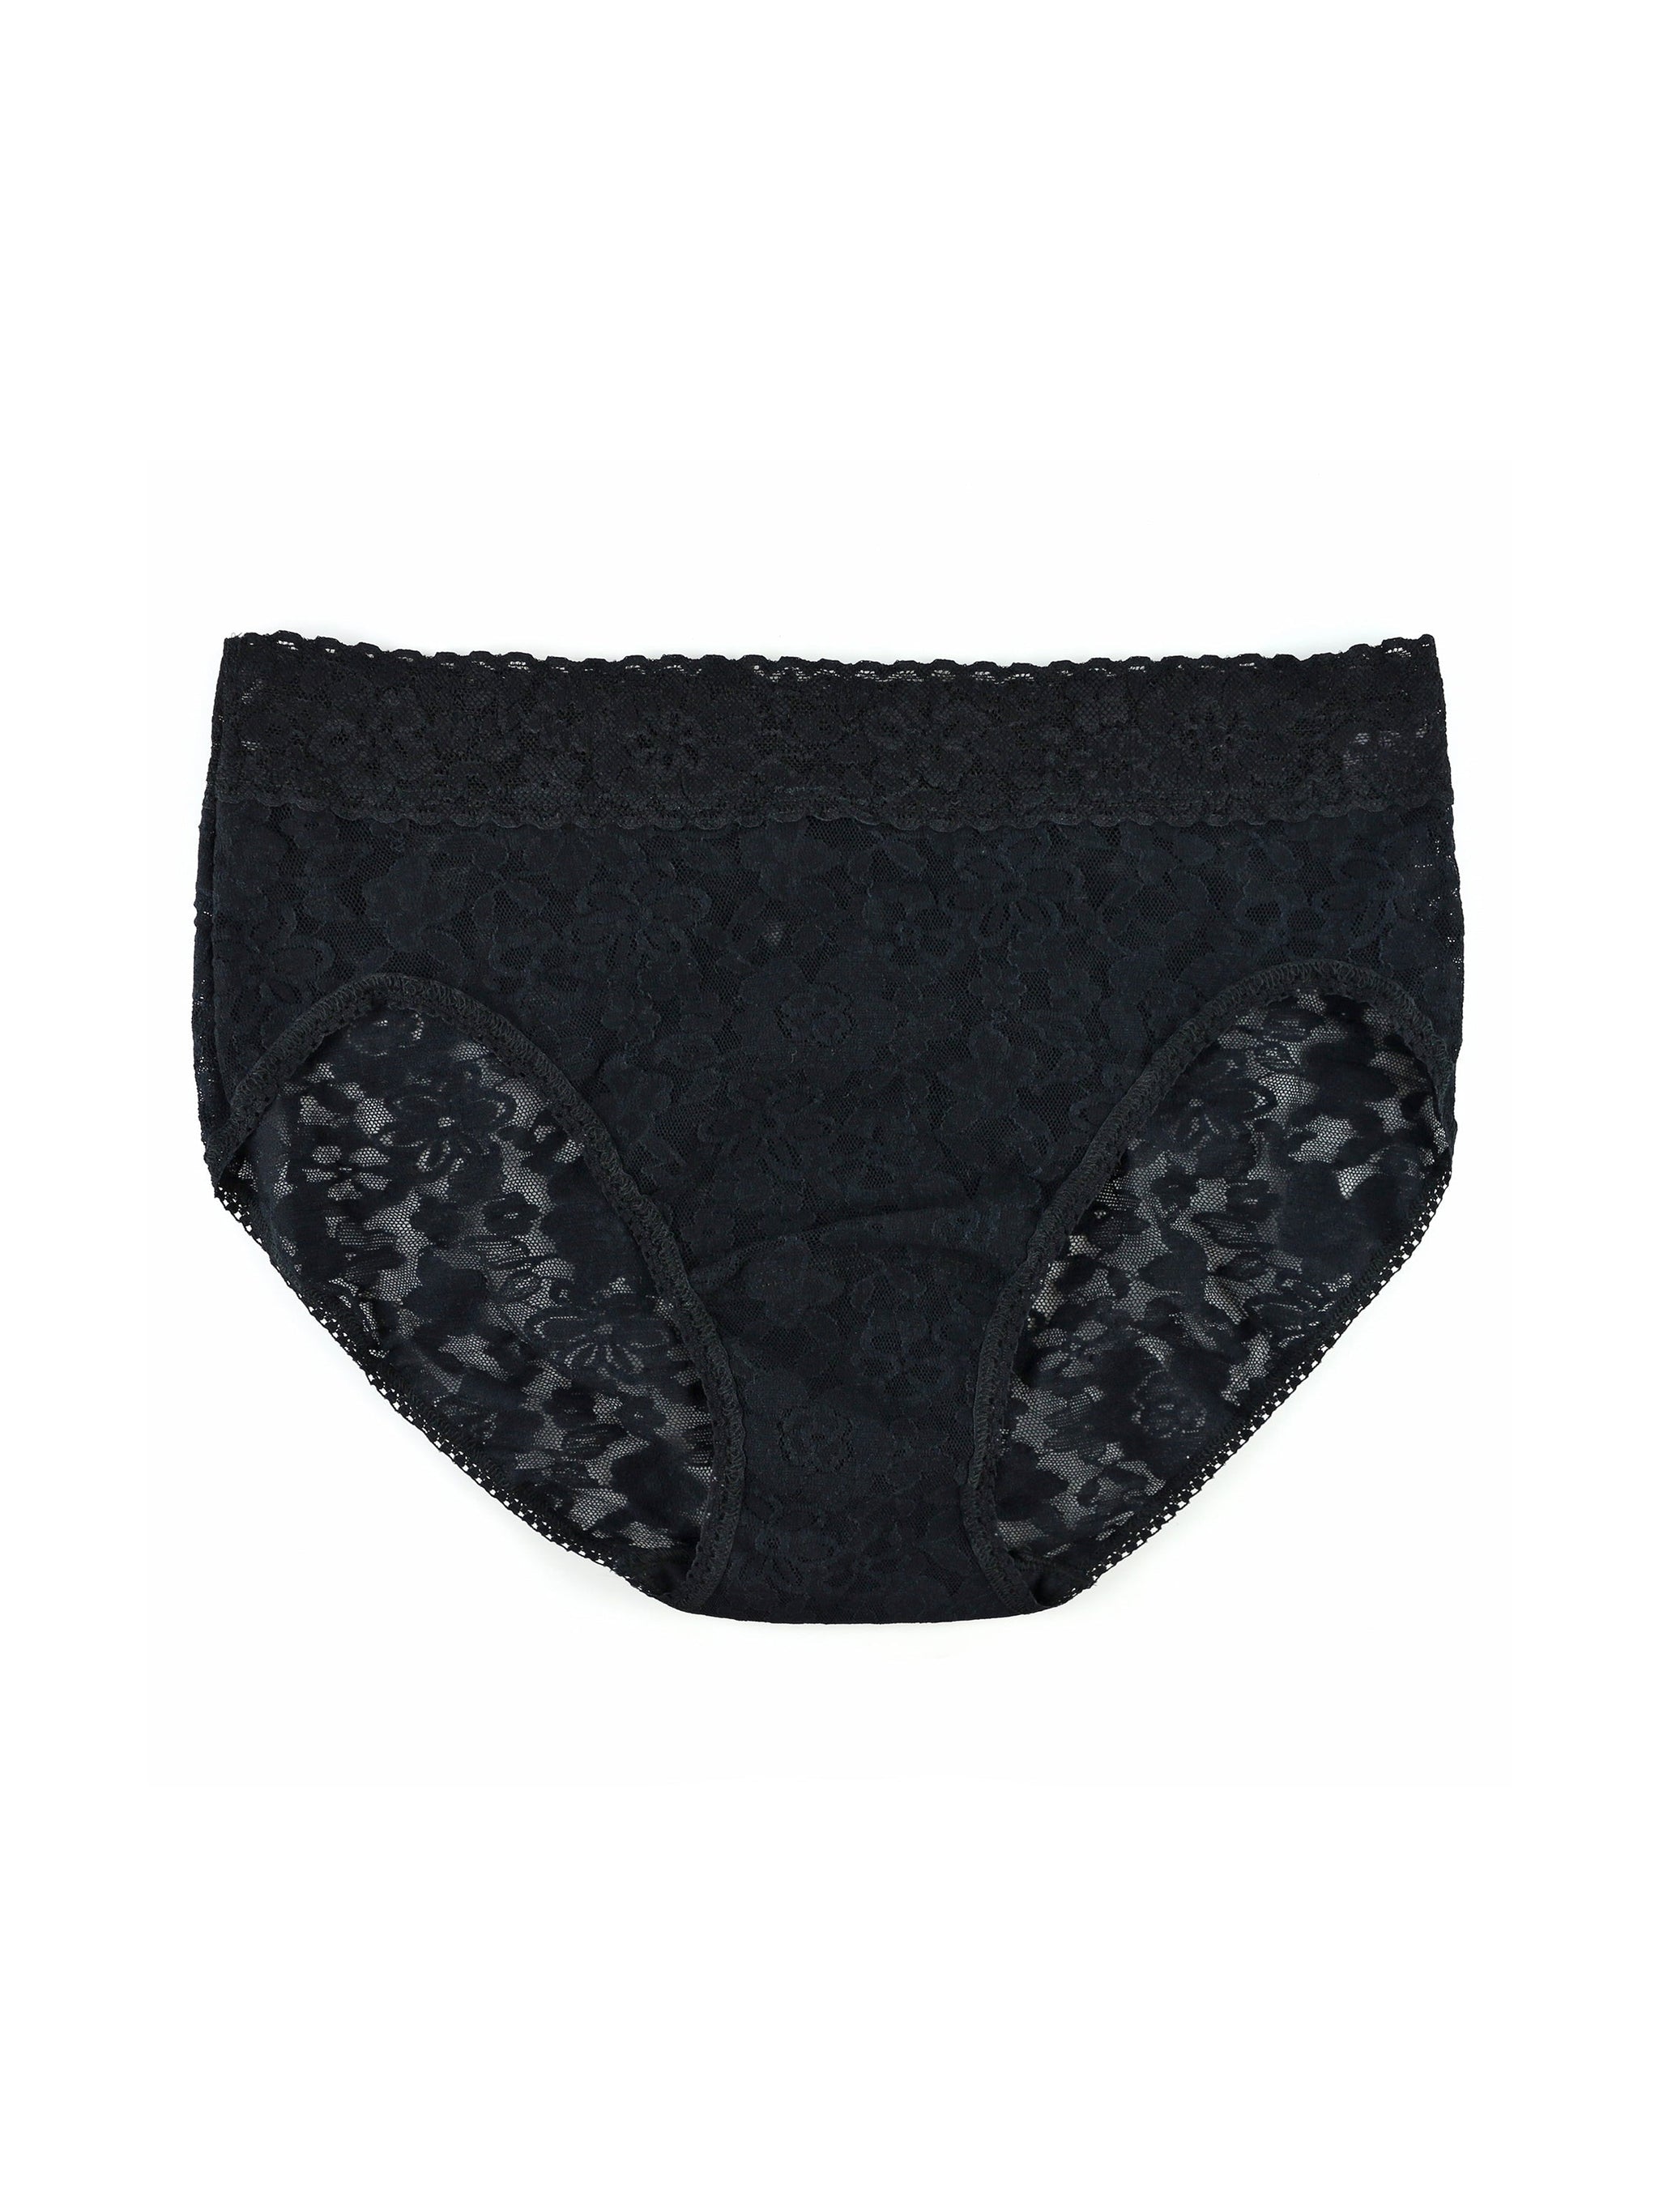 Daily Lace™ French Brief Black Sale